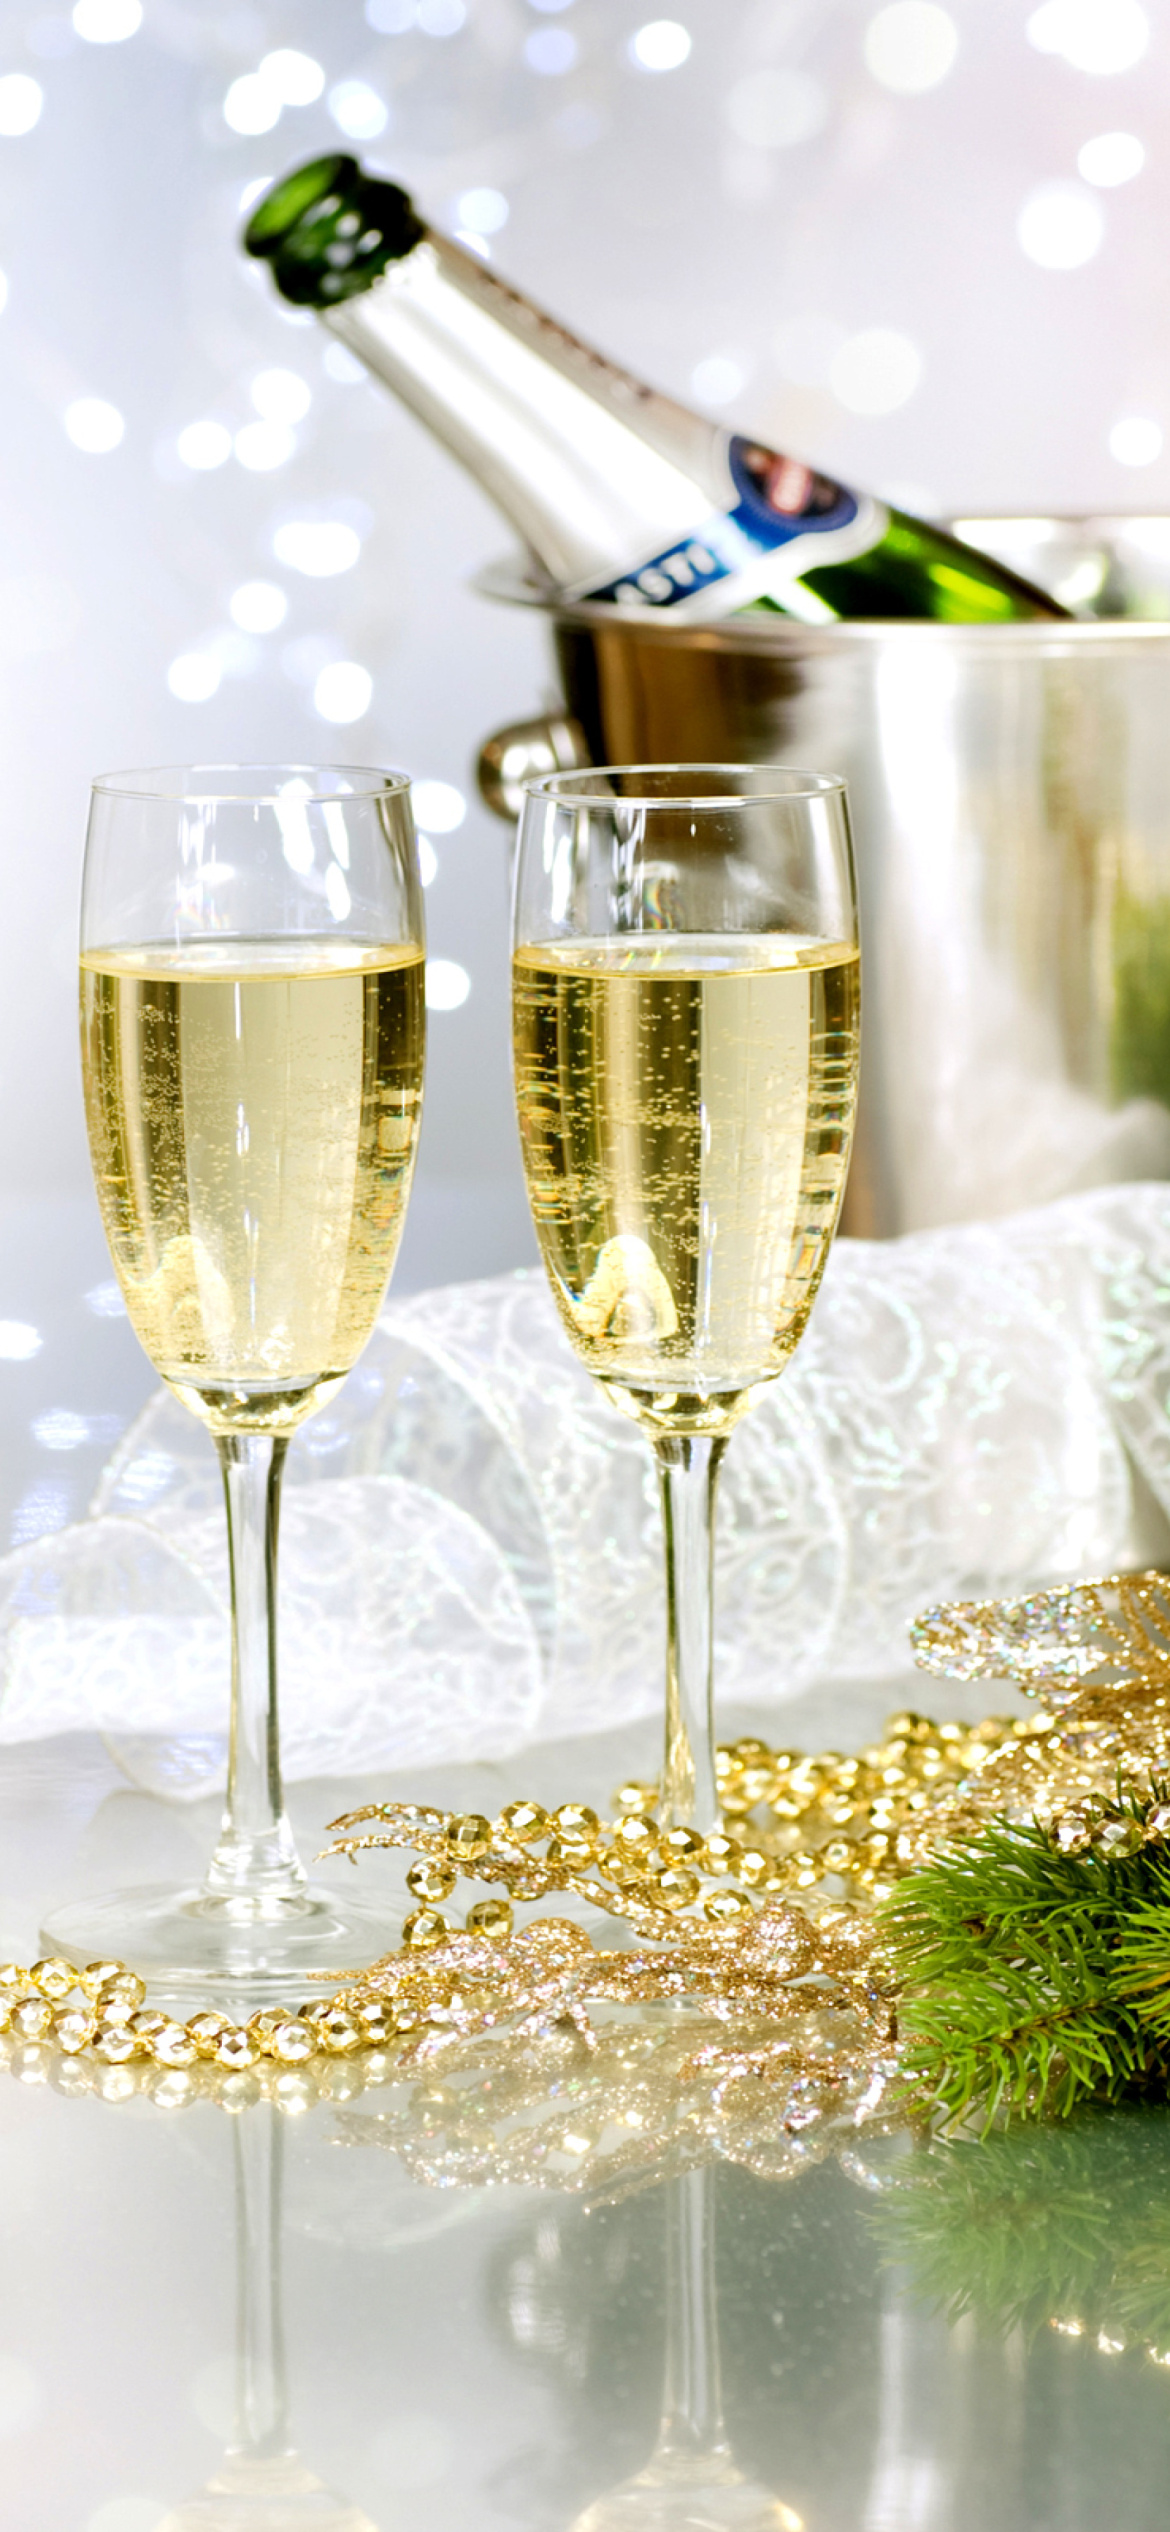 Champagne To Celebrate The New Year wallpaper 1170x2532